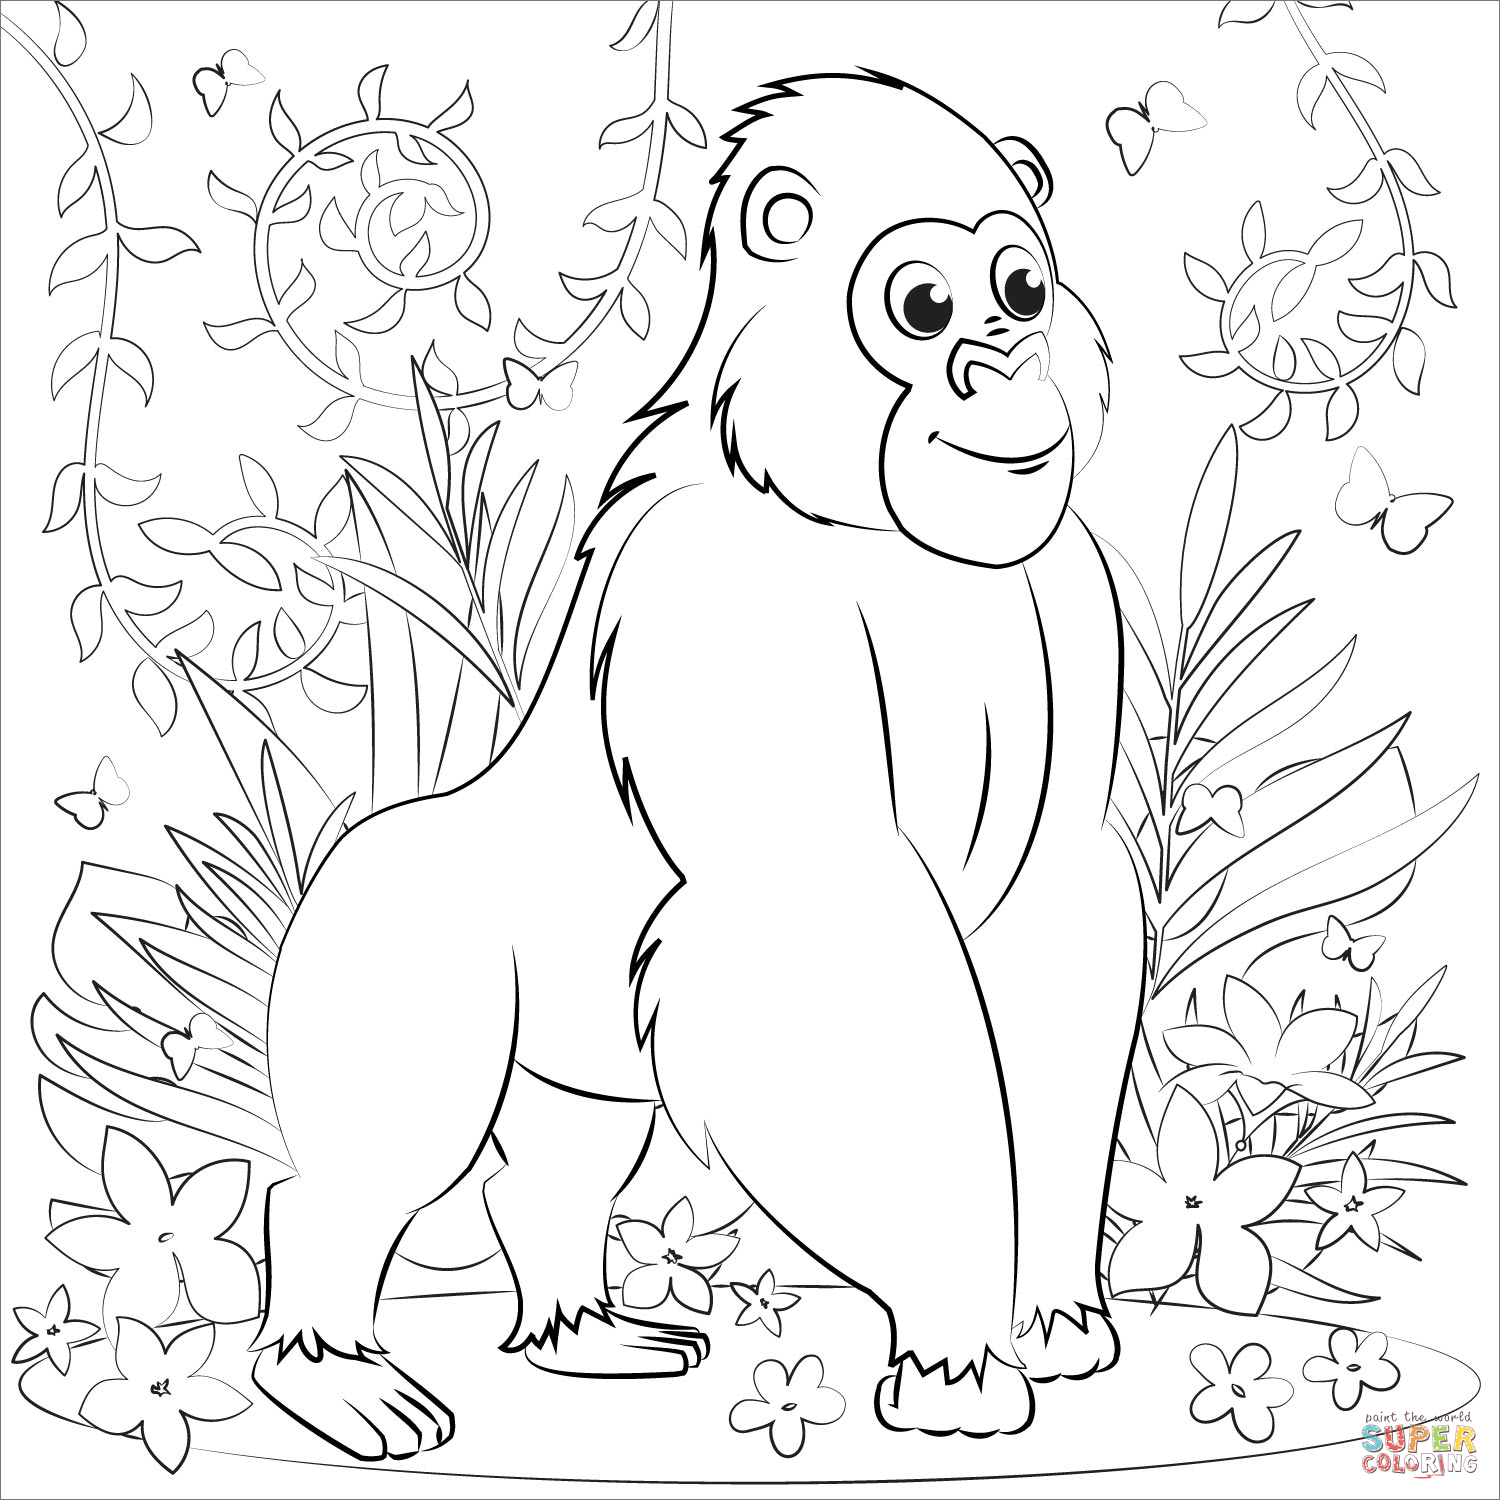 Gorilla coloring page free printable coloring pages